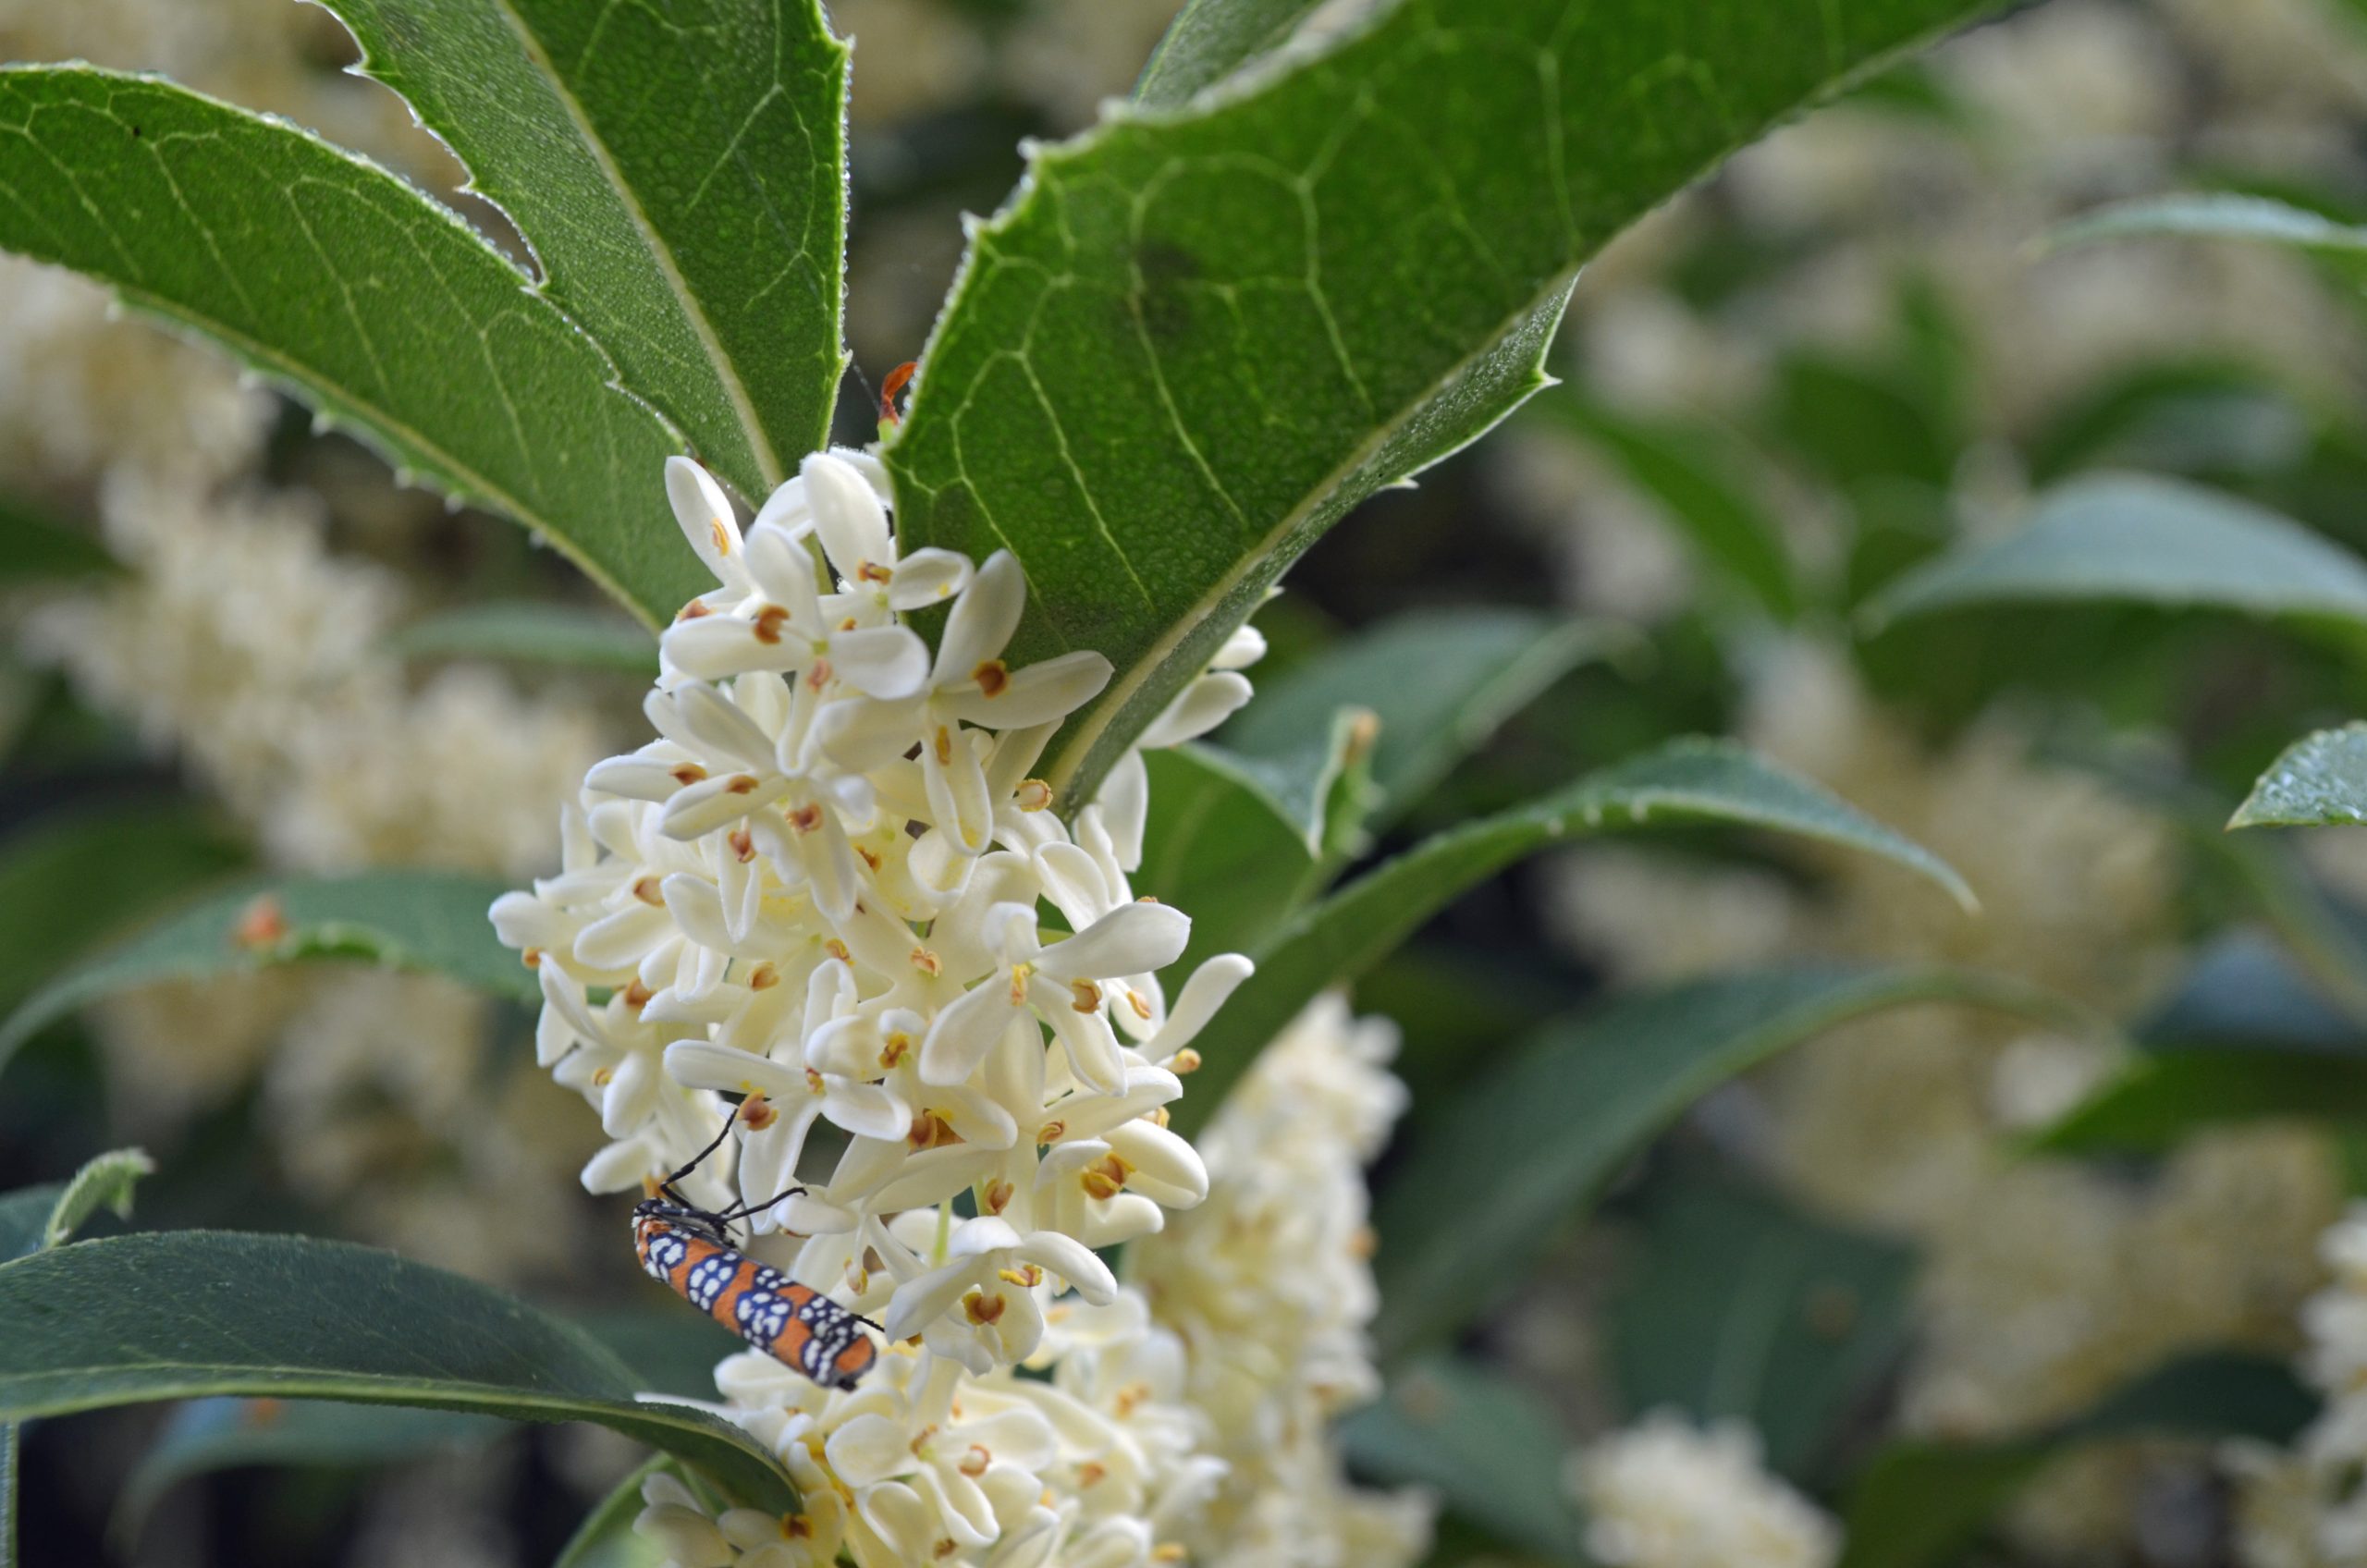 Osmanthus: Planting for Frangrance -- From Lewis Ginter Botanical